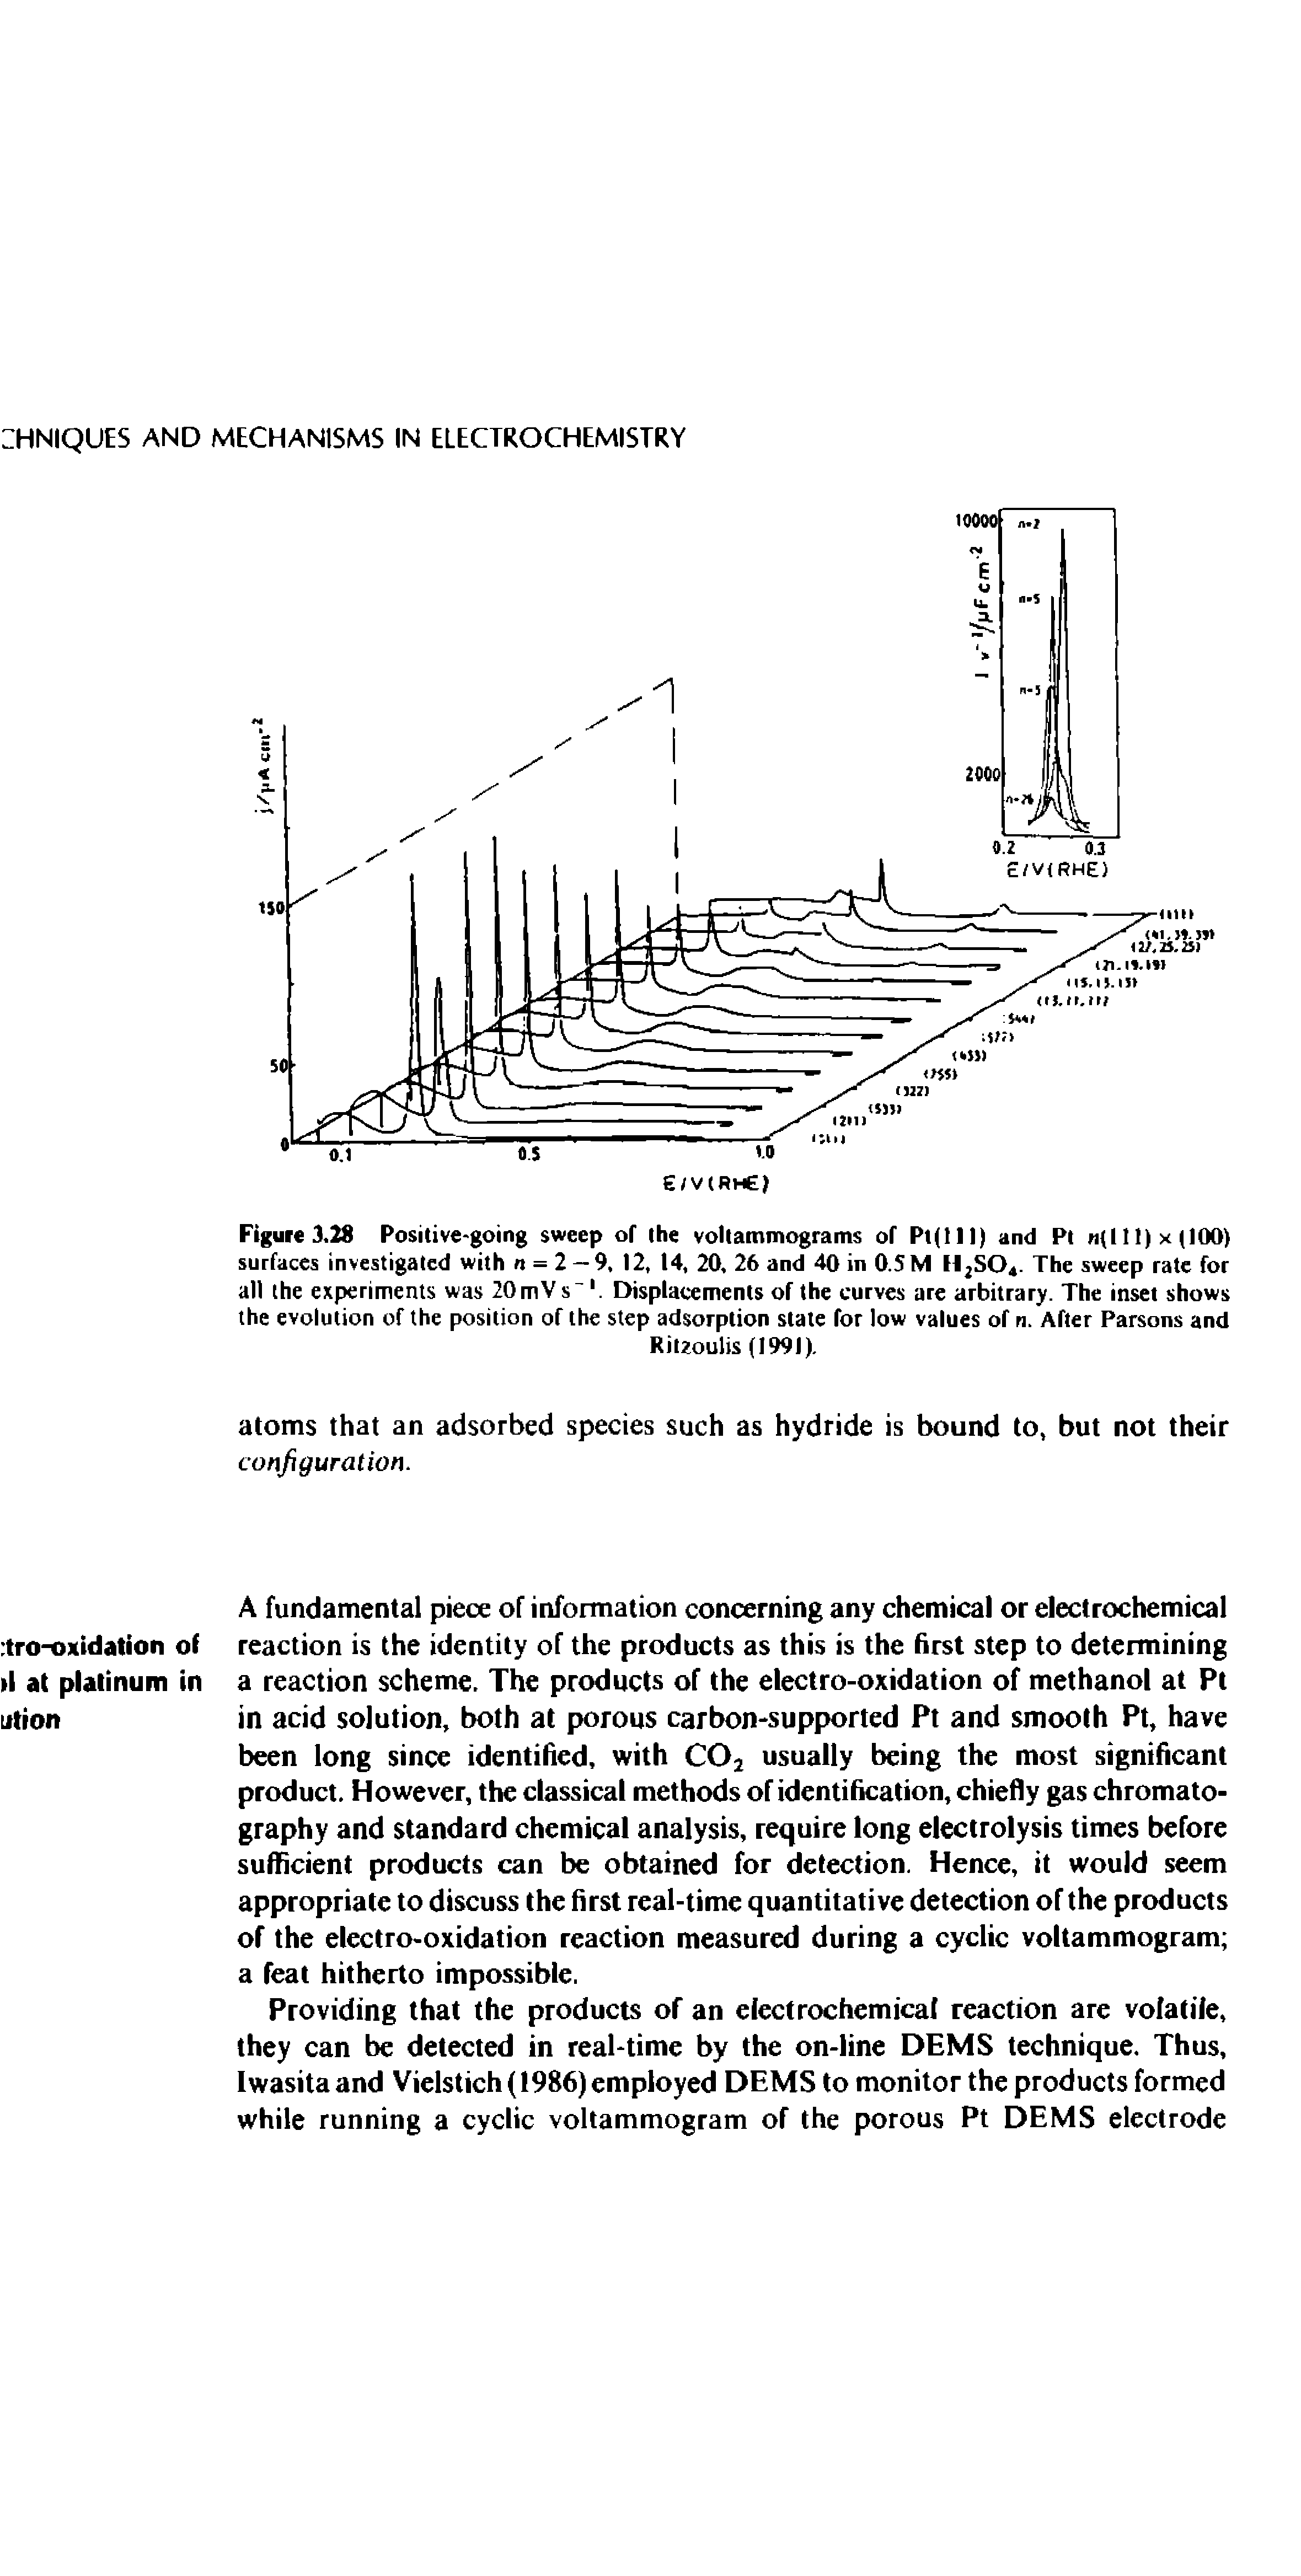 Figure 3.28 Positive-going sweep of the voltammograms of Pt(lll) and Pt m(I11)x(1Q0) surfaces investigated with n = 2 — 9, 12, 14, 20, 26 and 40 in O.SM ll2S04. The sweep rate for all the experiments was 20mVs Displacements of the curves are arbitrary. The inset shows the evolution of the position of the step adsorption state for low values of n. After Parsons and...